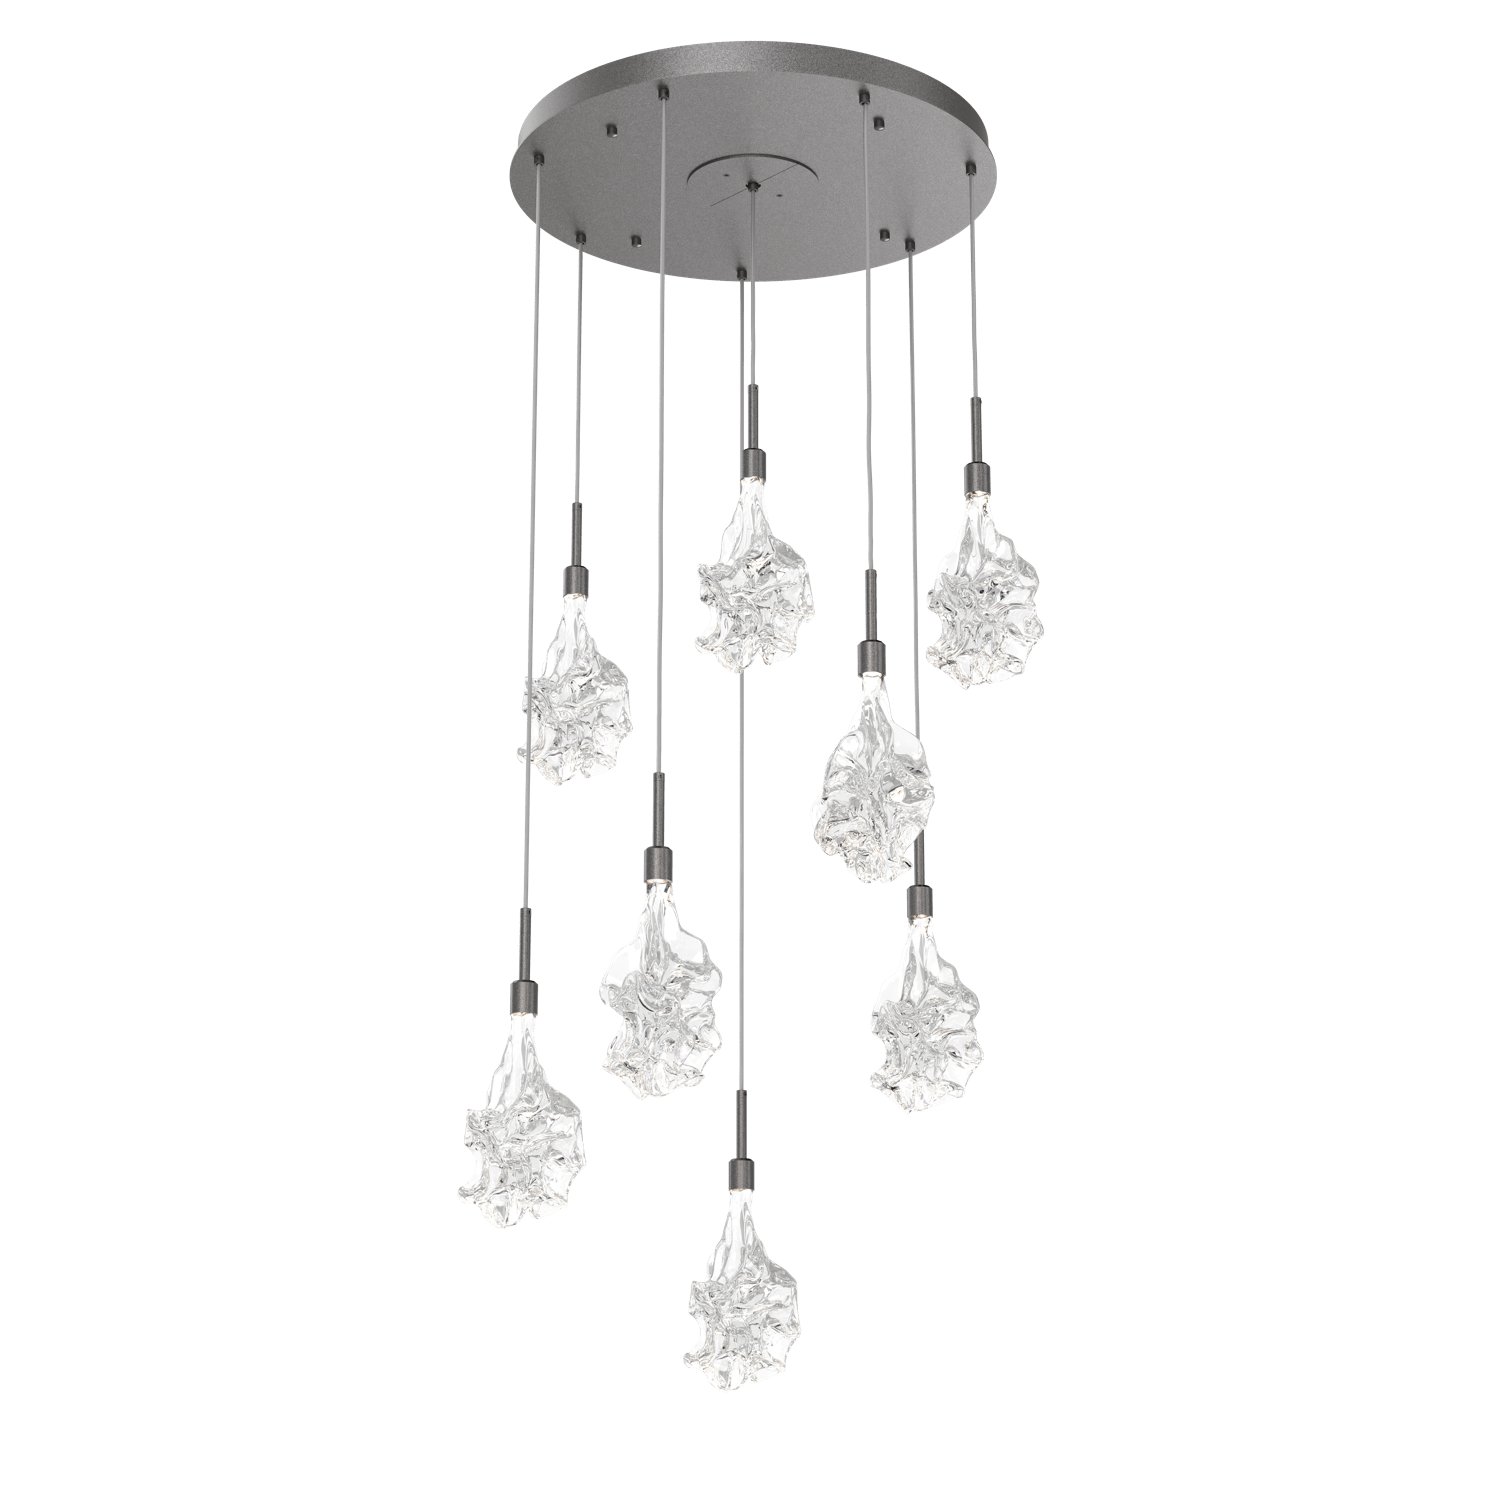 CHB0059-08-GP-Hammerton-Studio-Blossom-8-light-round-pendant-chandelier-with-graphite-finish-and-clear-handblown-crystal-glass-shades-and-LED-lamping